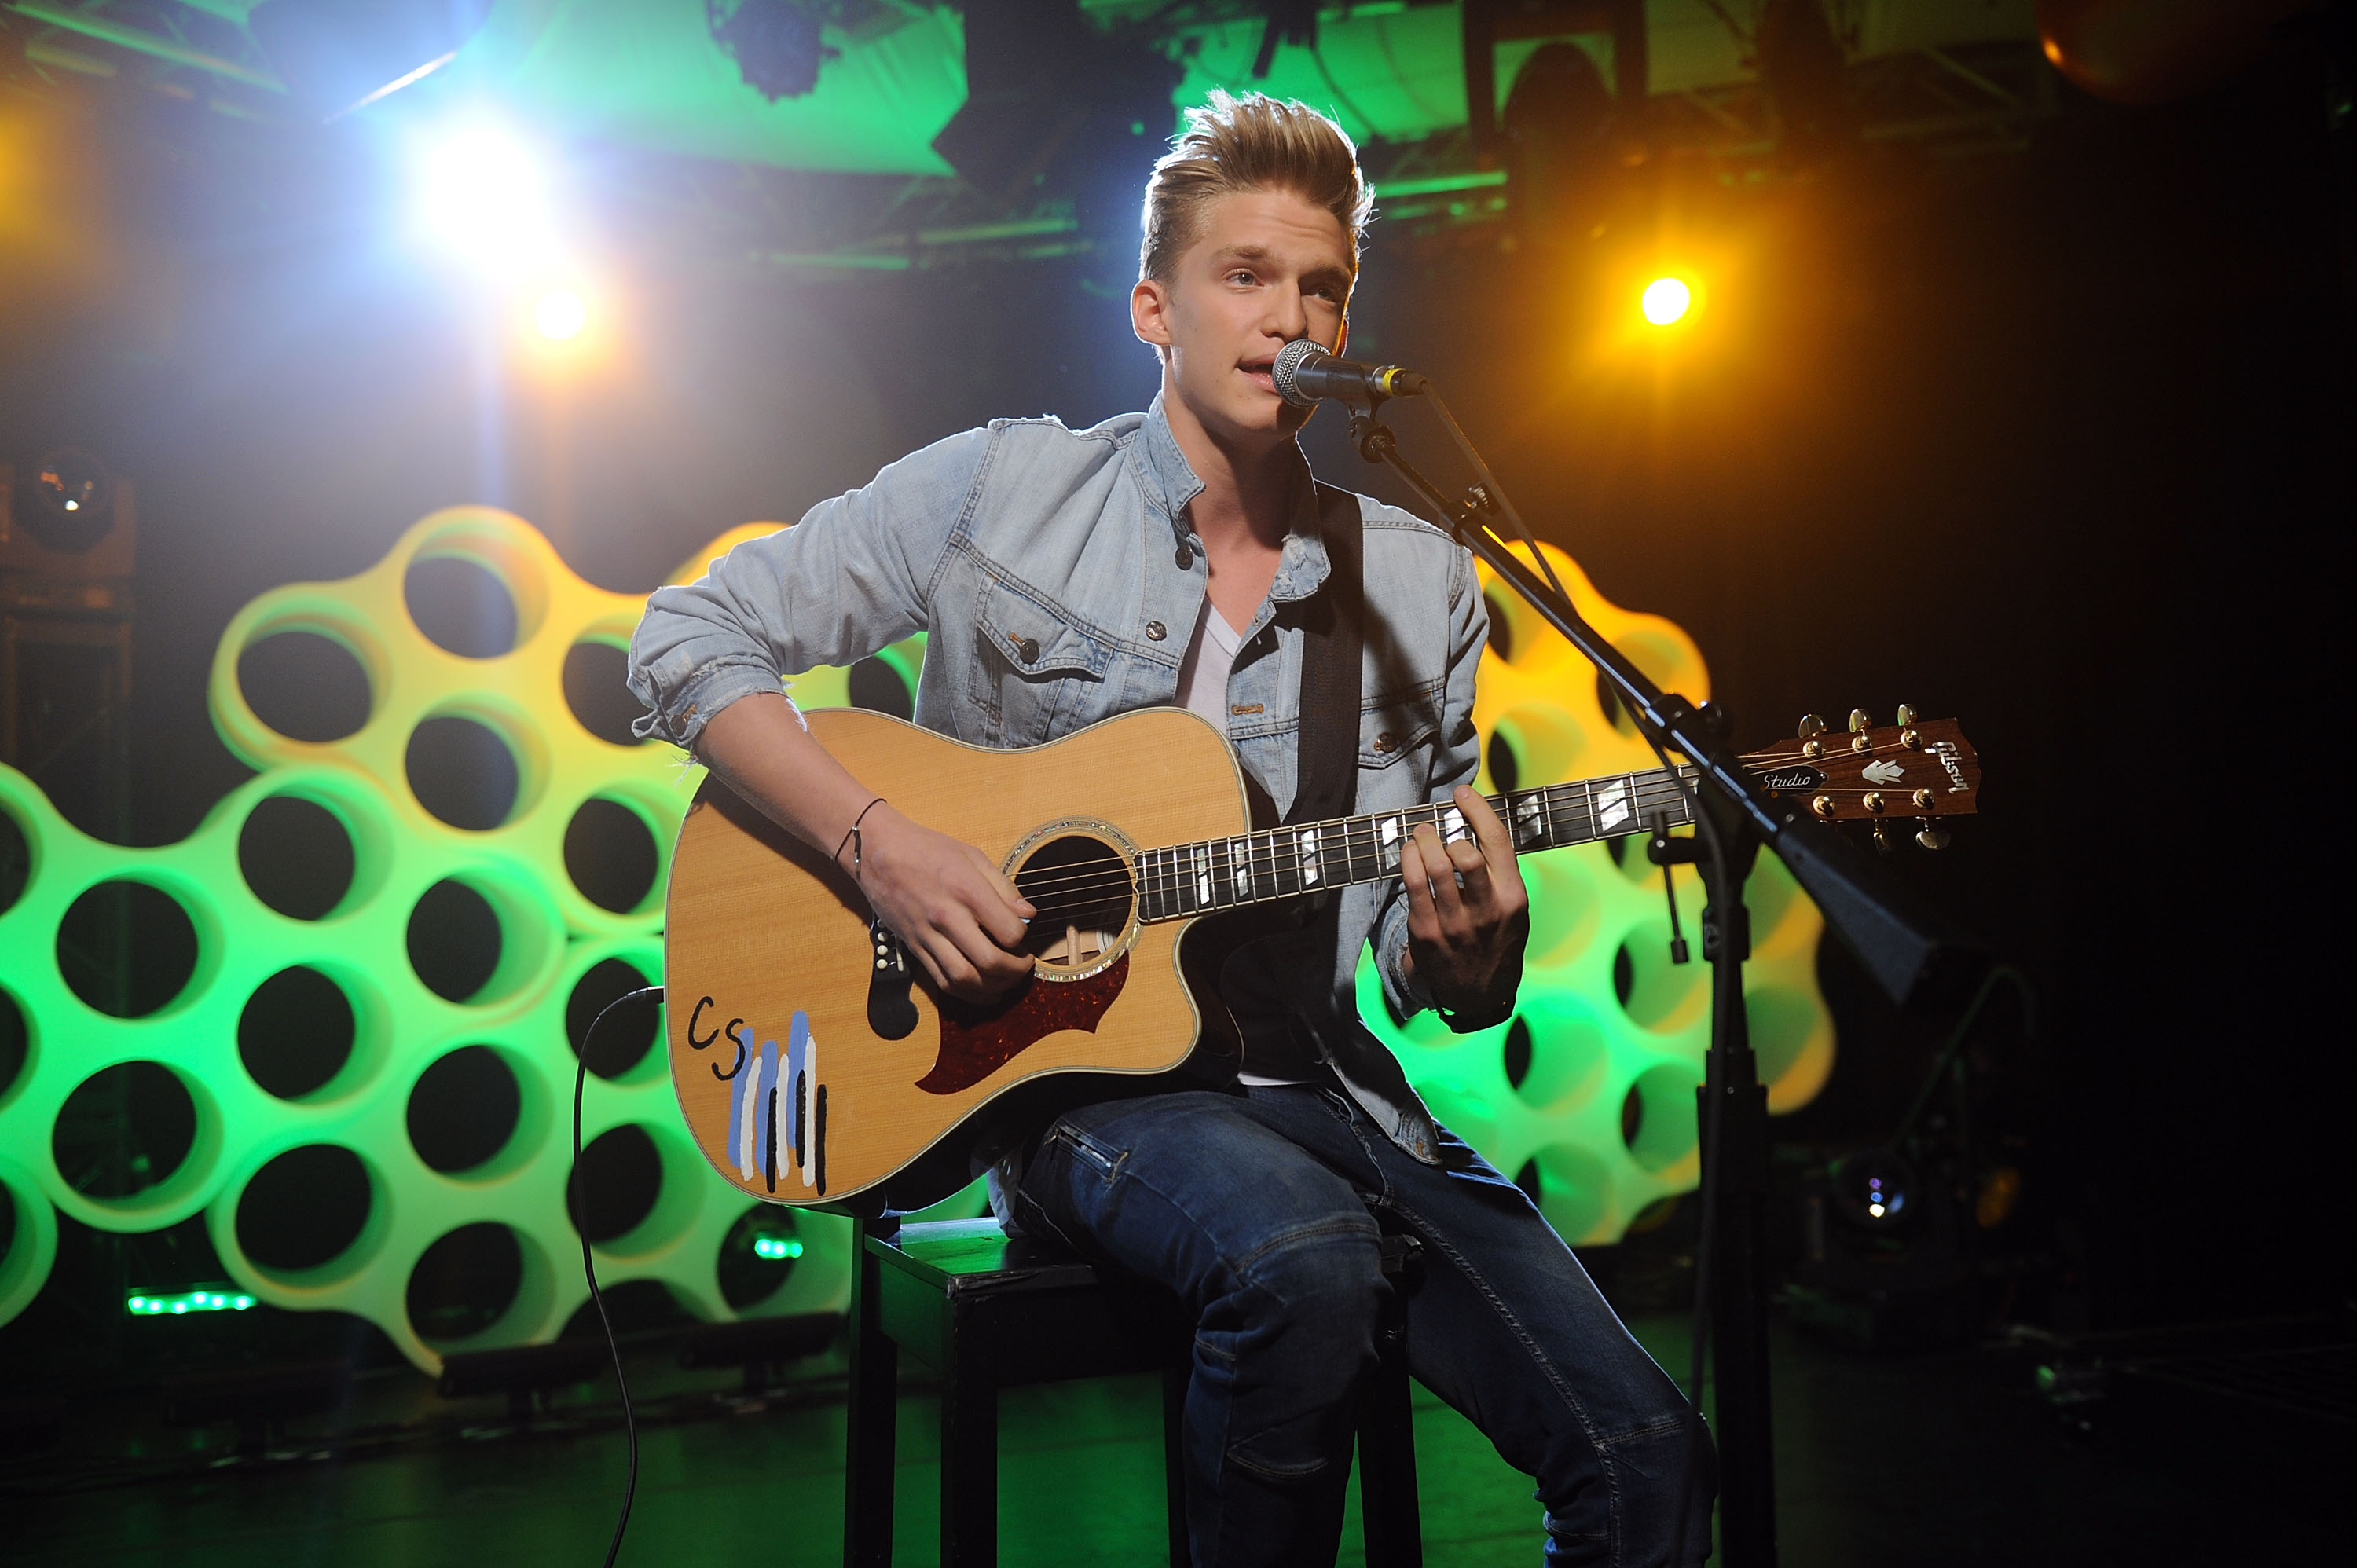 From 2010 to 2022, Cody has put out tons of music for fans to hear